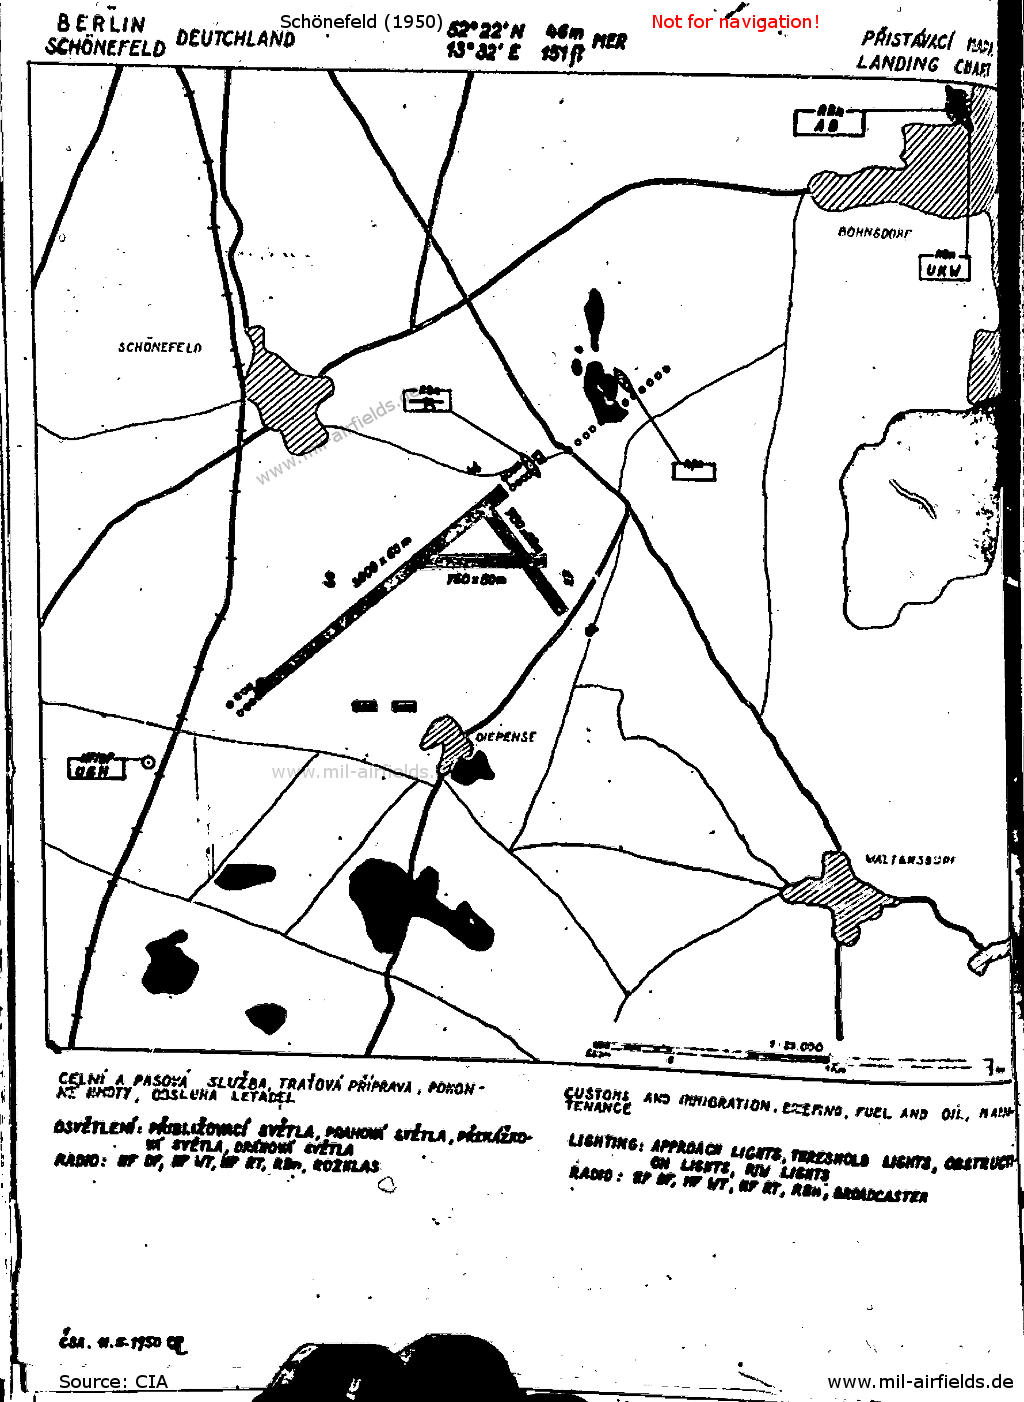 Map of Schönefeld airport from the Czechoslovak aeronautical publication from 1950